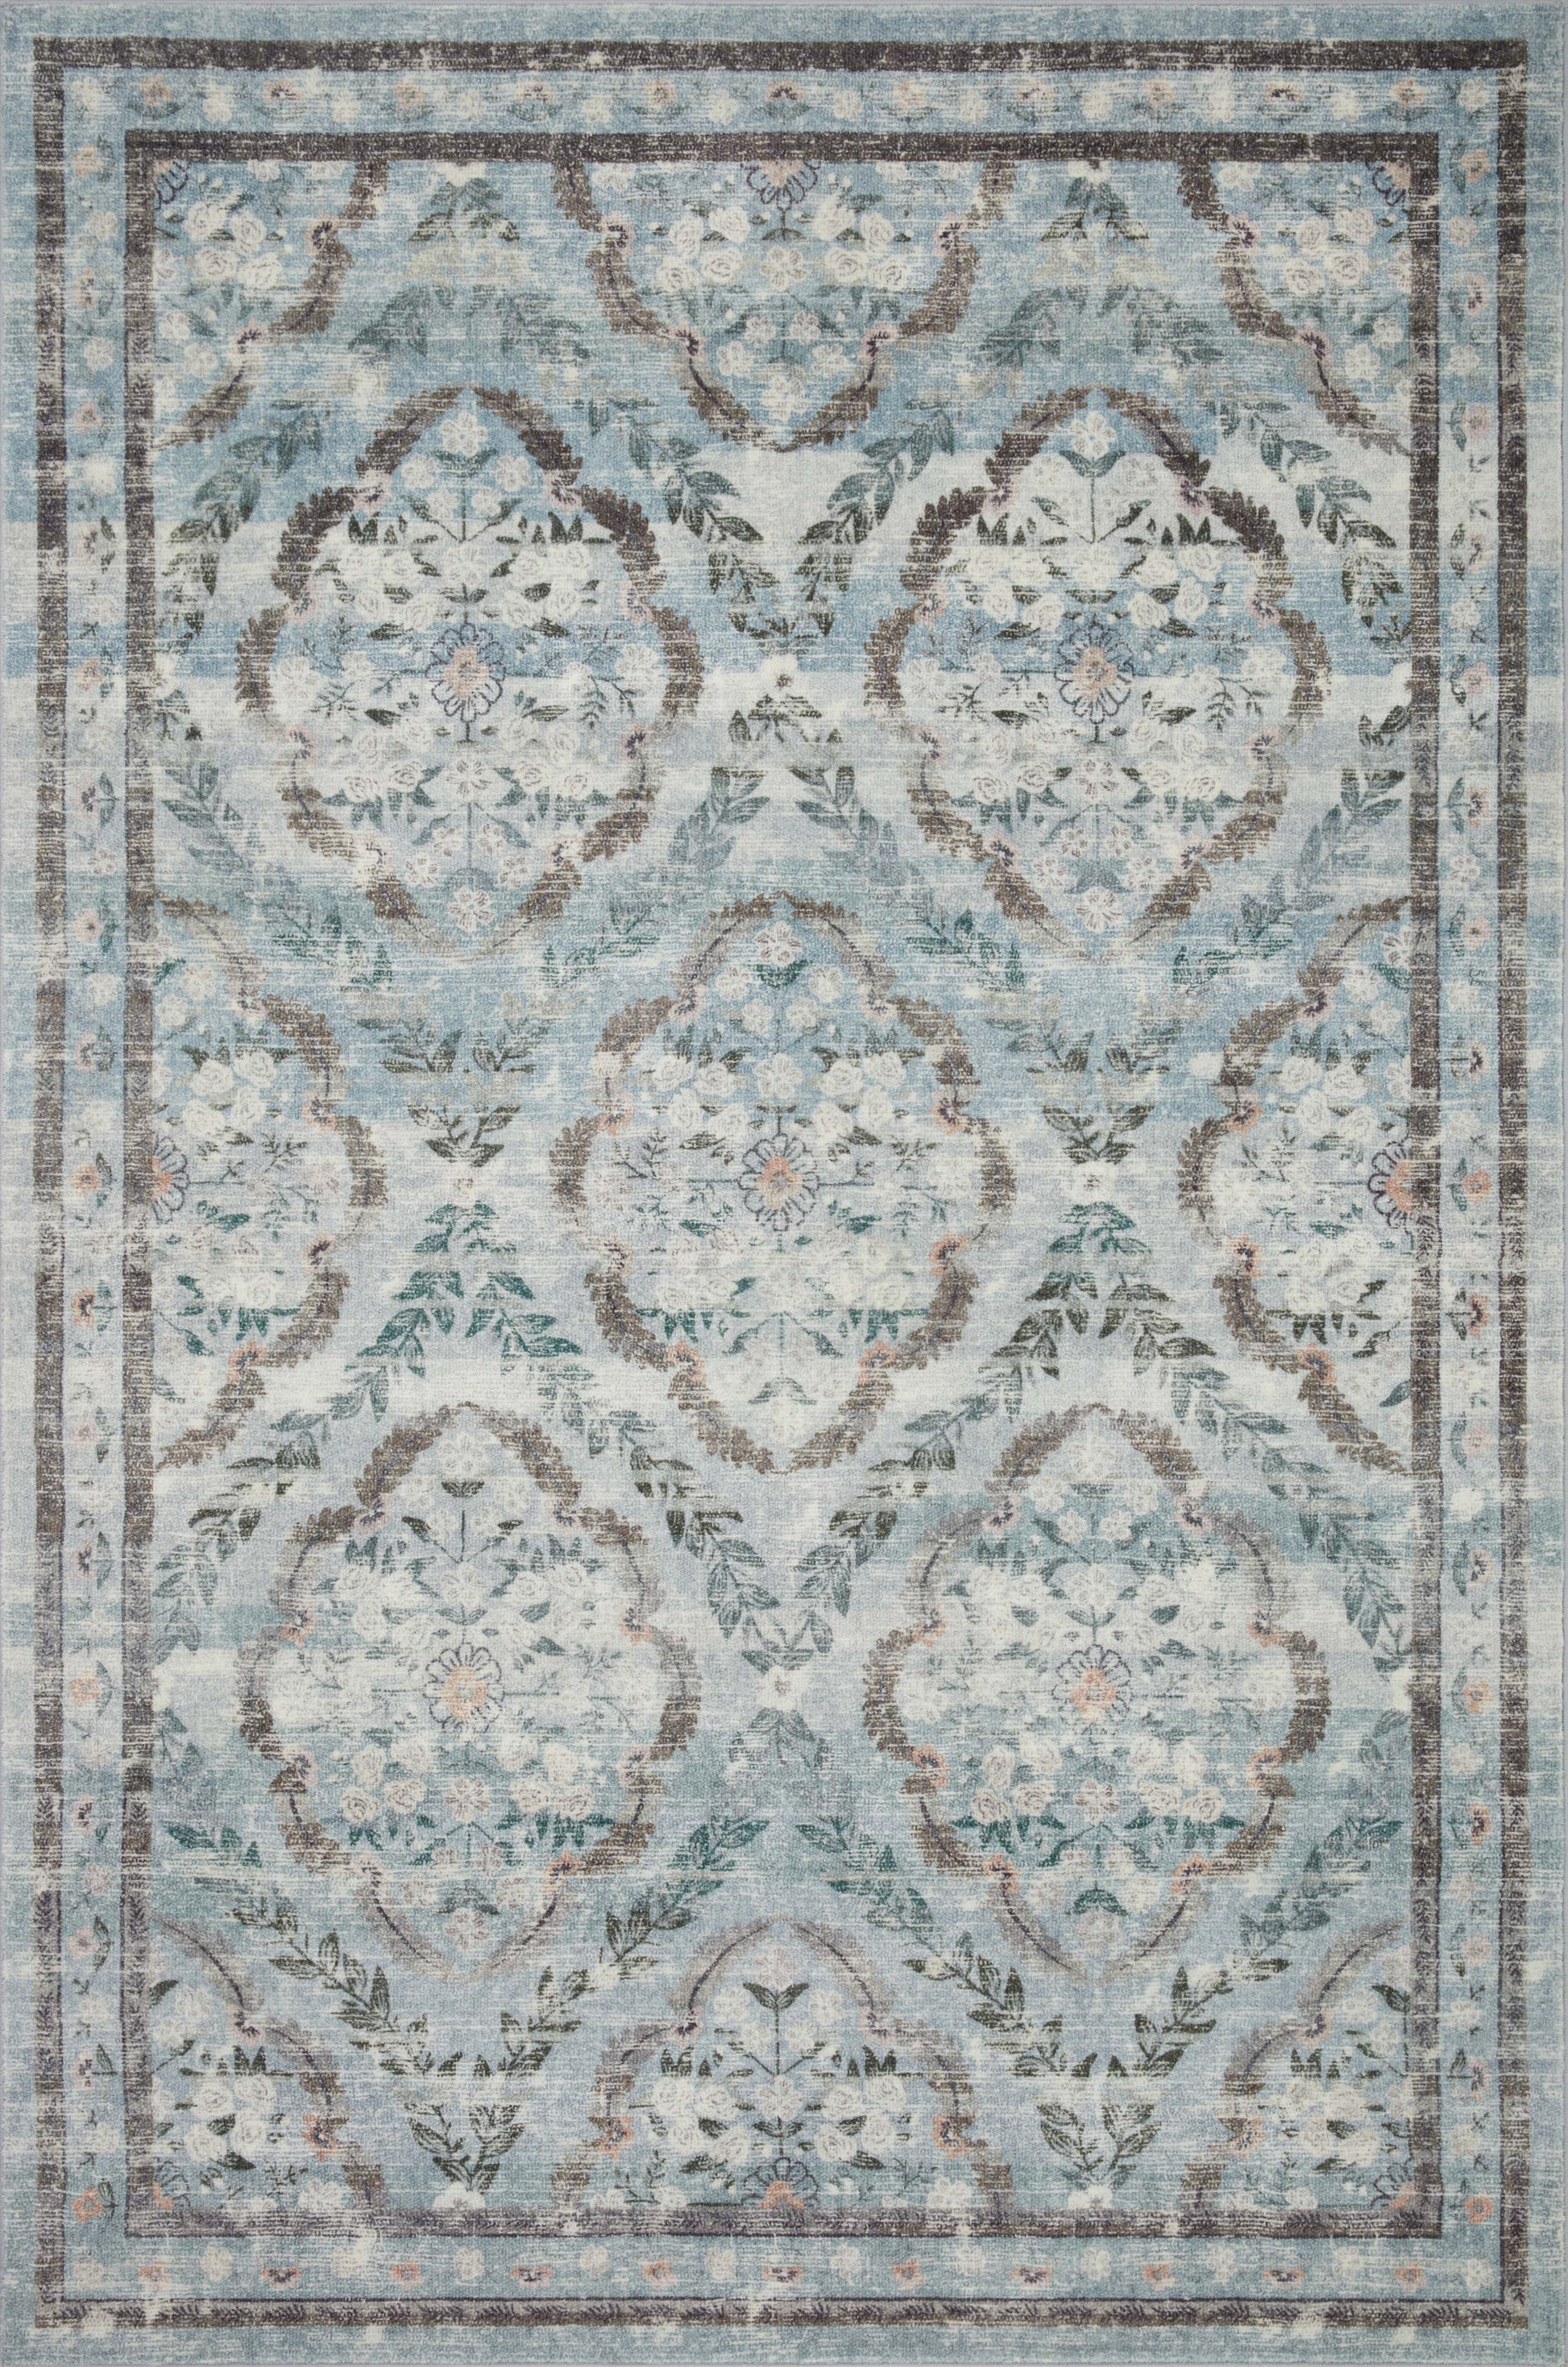 A picture of Loloi's Courtyard rug, in style COU-02, color Blue